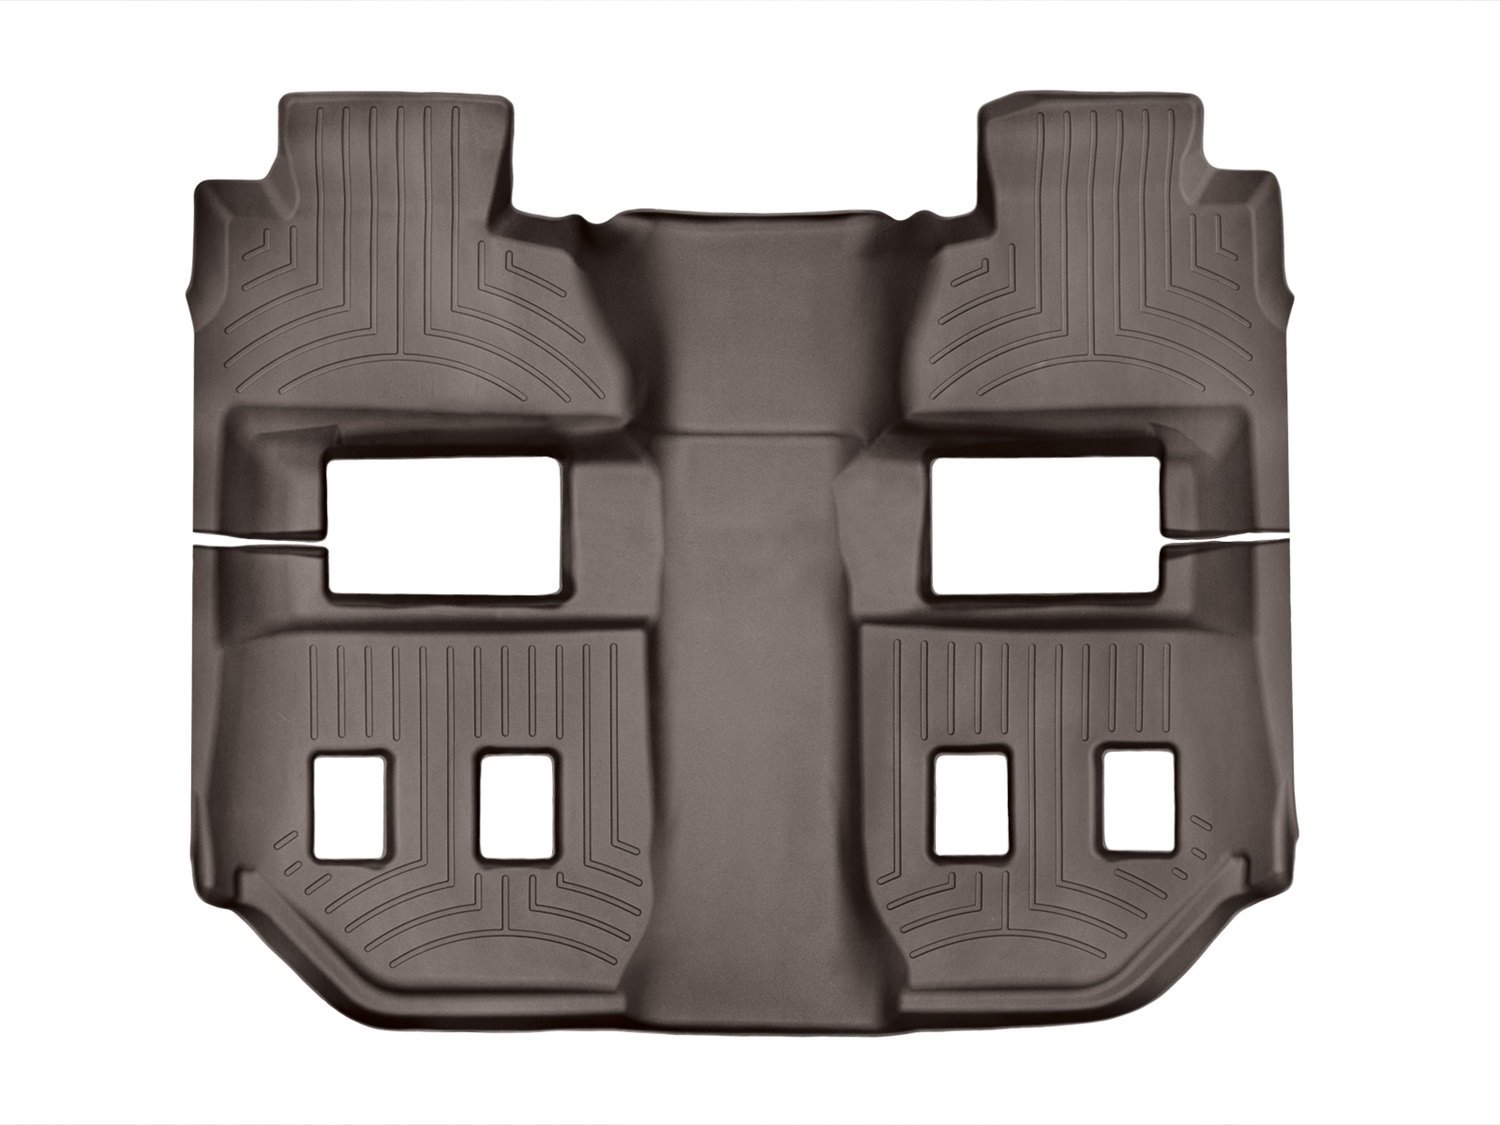 REAR FLOORLINER COCOA CHEVROLET SUBURBAN 2015-2017 FITS VEHICLES WITH 2ND ROW BUCKET SEATS